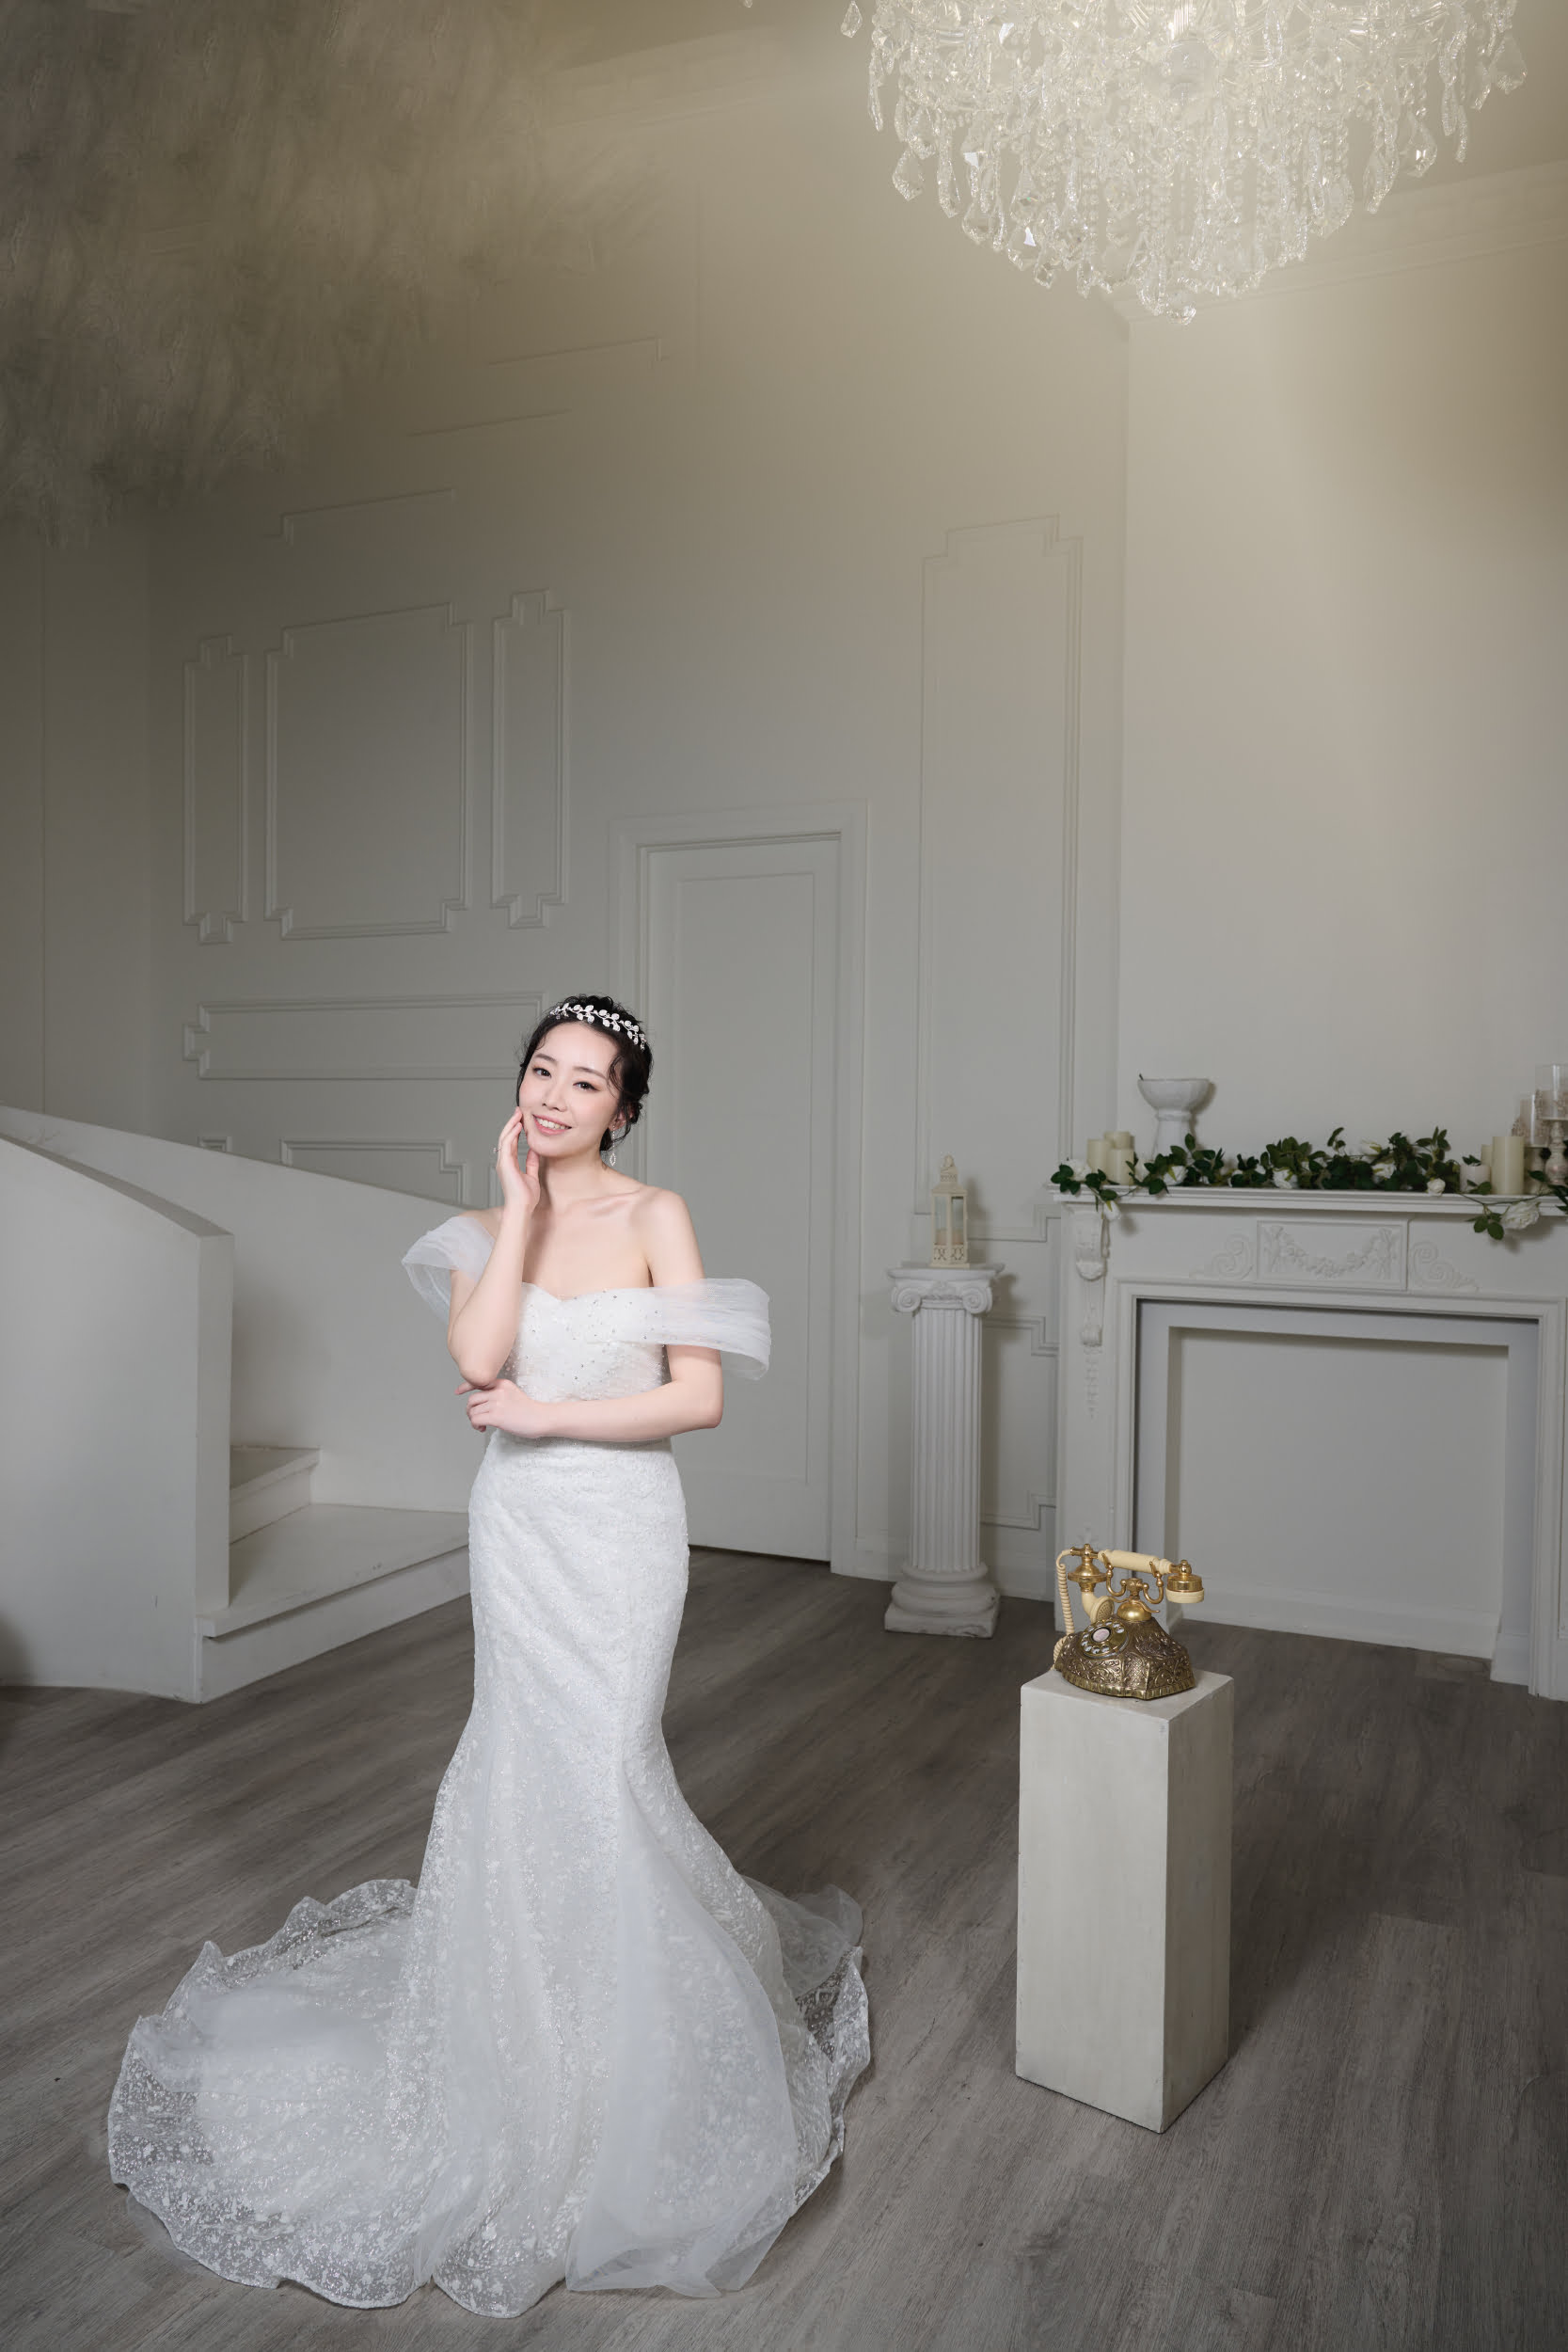 Feel like a star on your special day with the Star of Bethlehem wedding gown for rent in Toronto. This mermaid-style gown features a stunning silver tone, perfect for any luxurious wedding.